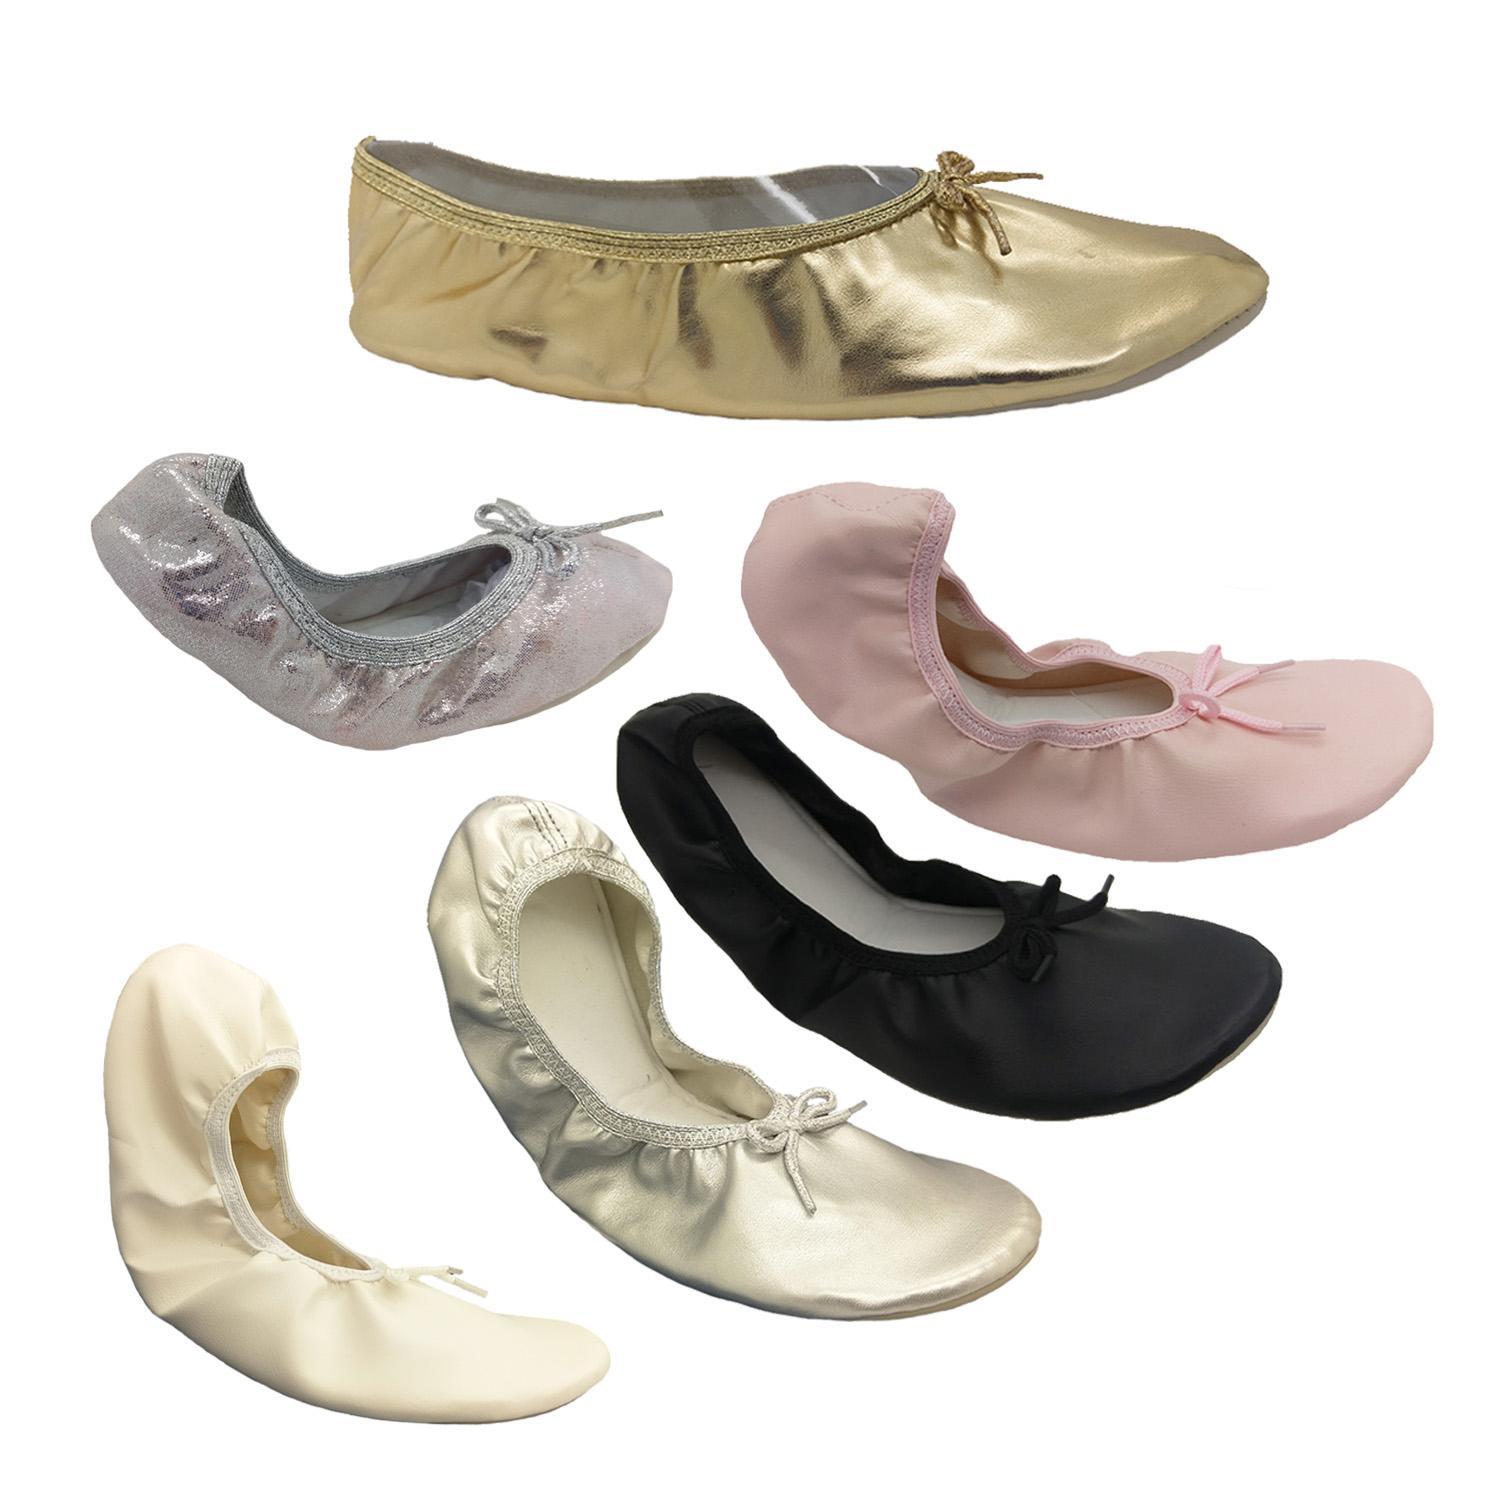 Girls Genuine Jiffies Classic Ballet Flats Elastic Edge Soft Insole Size 5 - 3-Gold-11-12